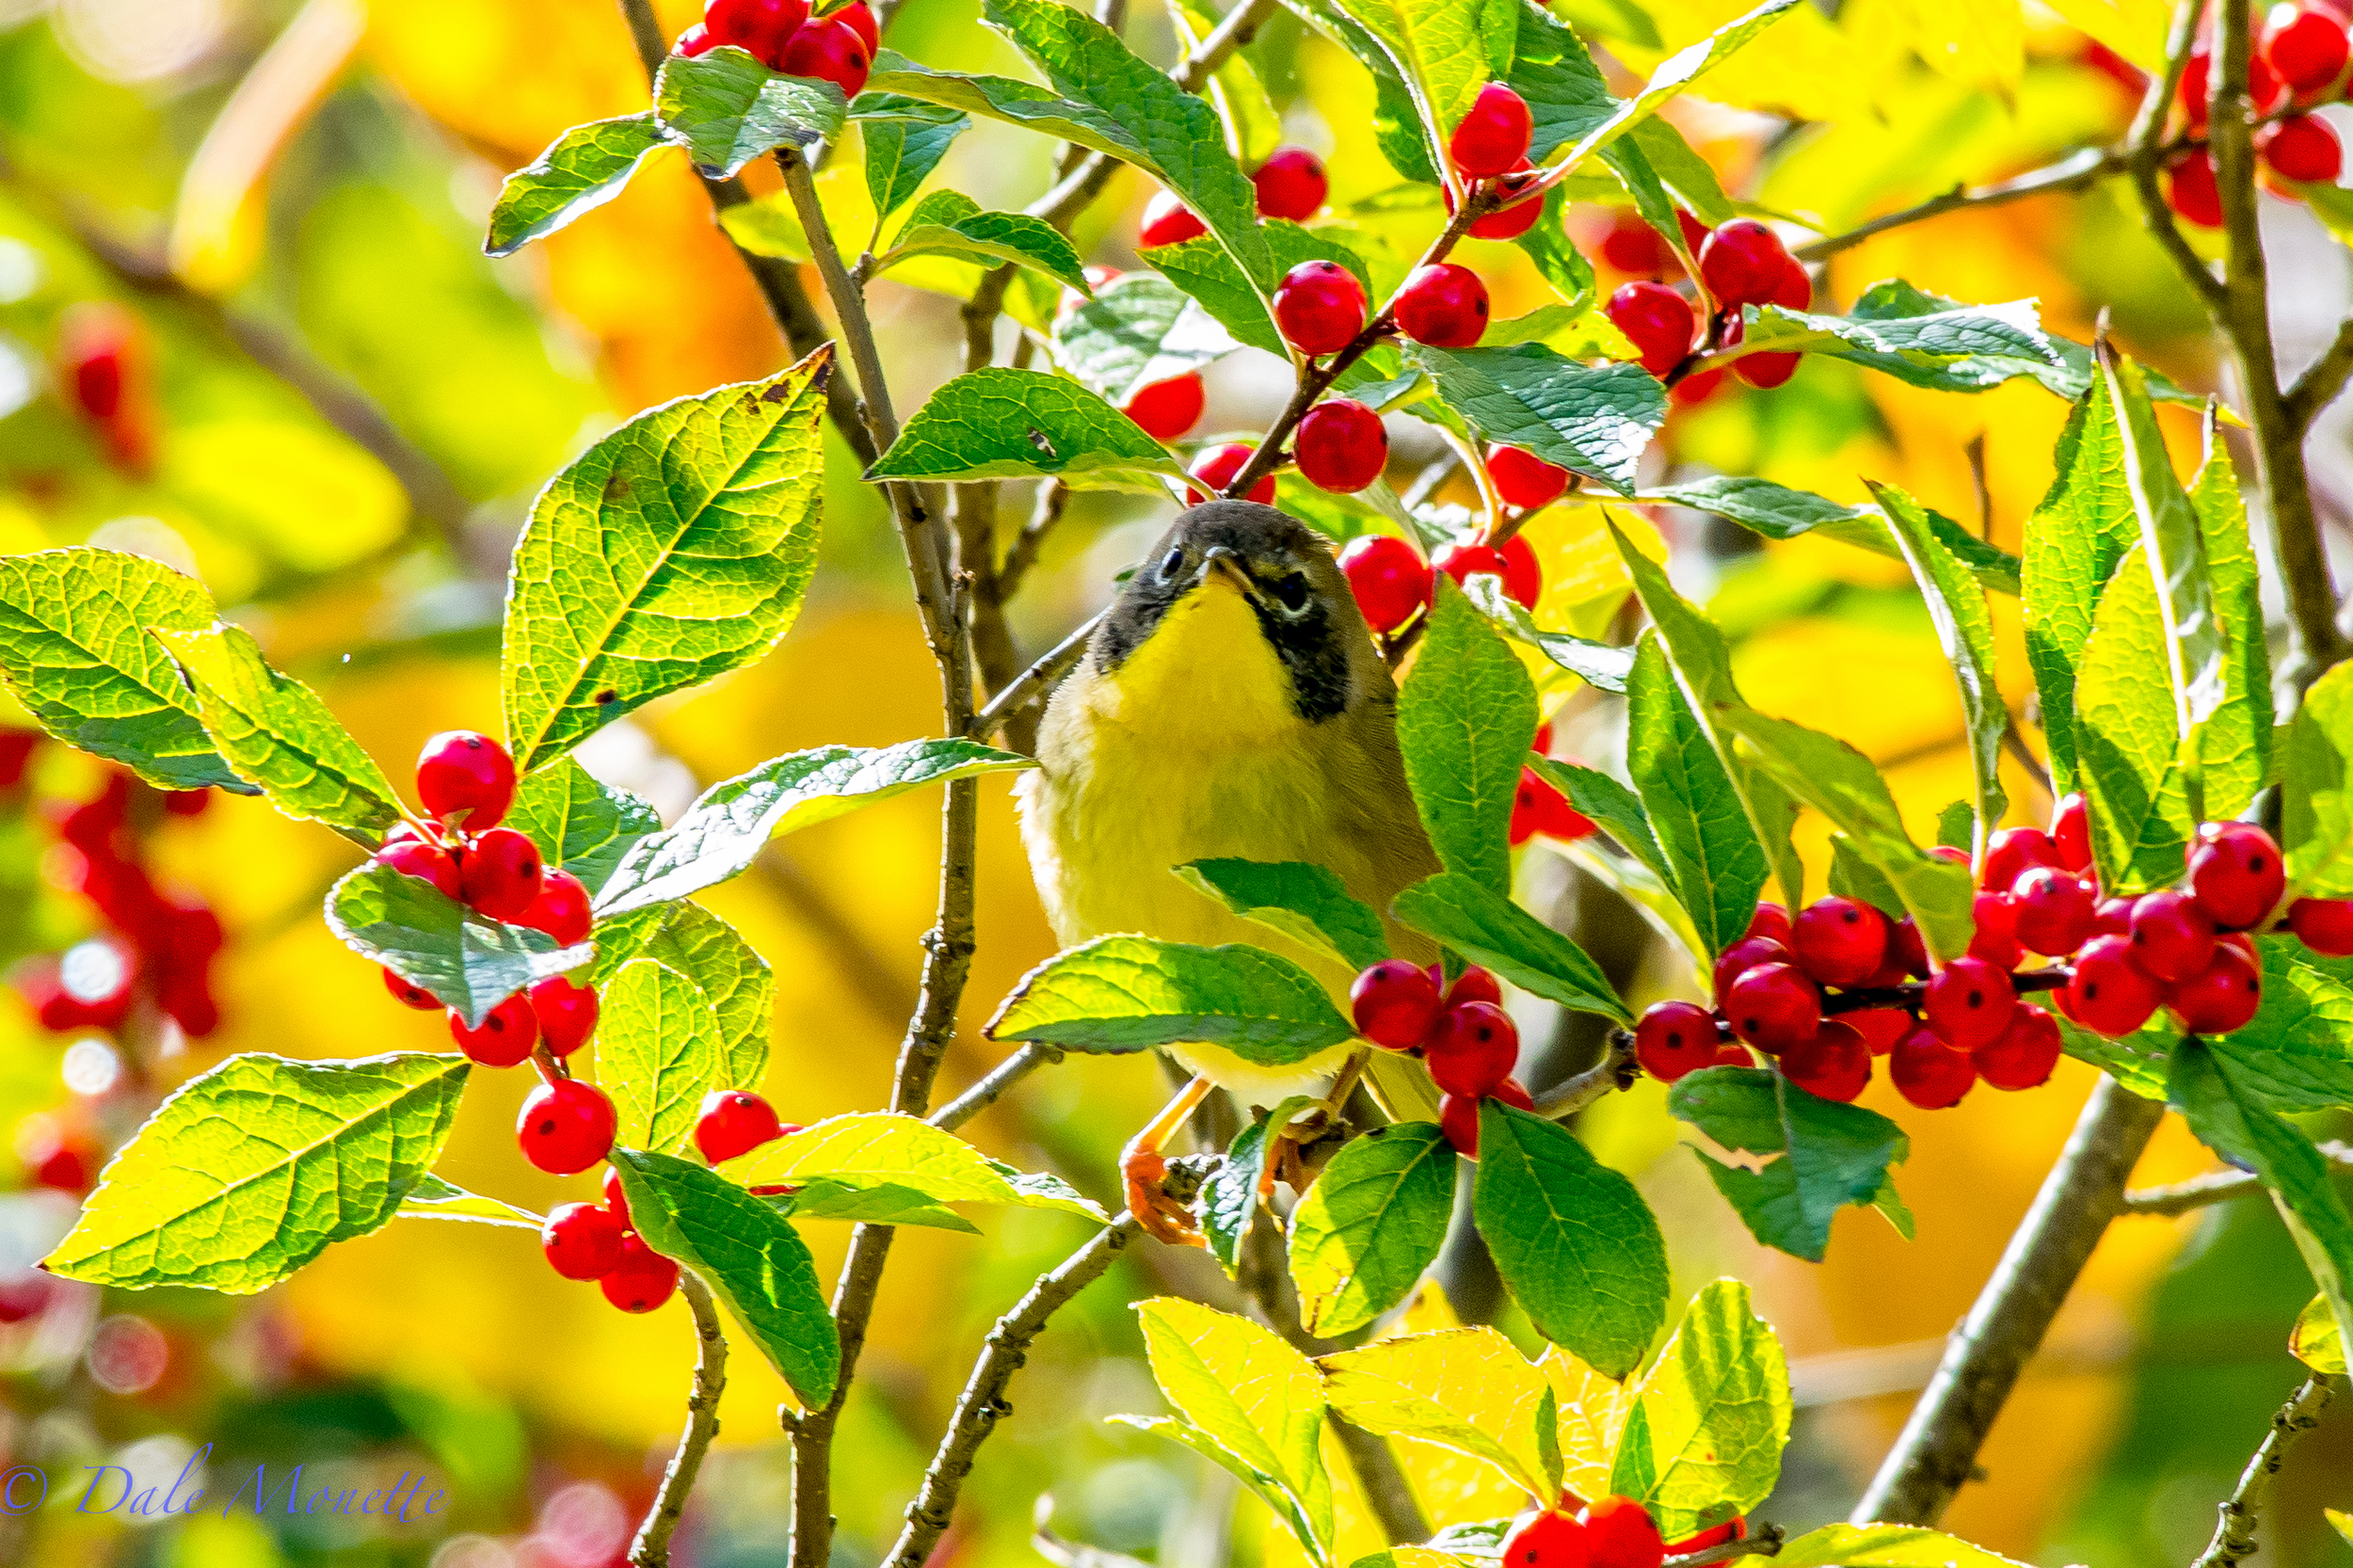   A common yellowthroat rummages through a winterberry bush looking for breakfast in early October. &nbsp;10/4/15  